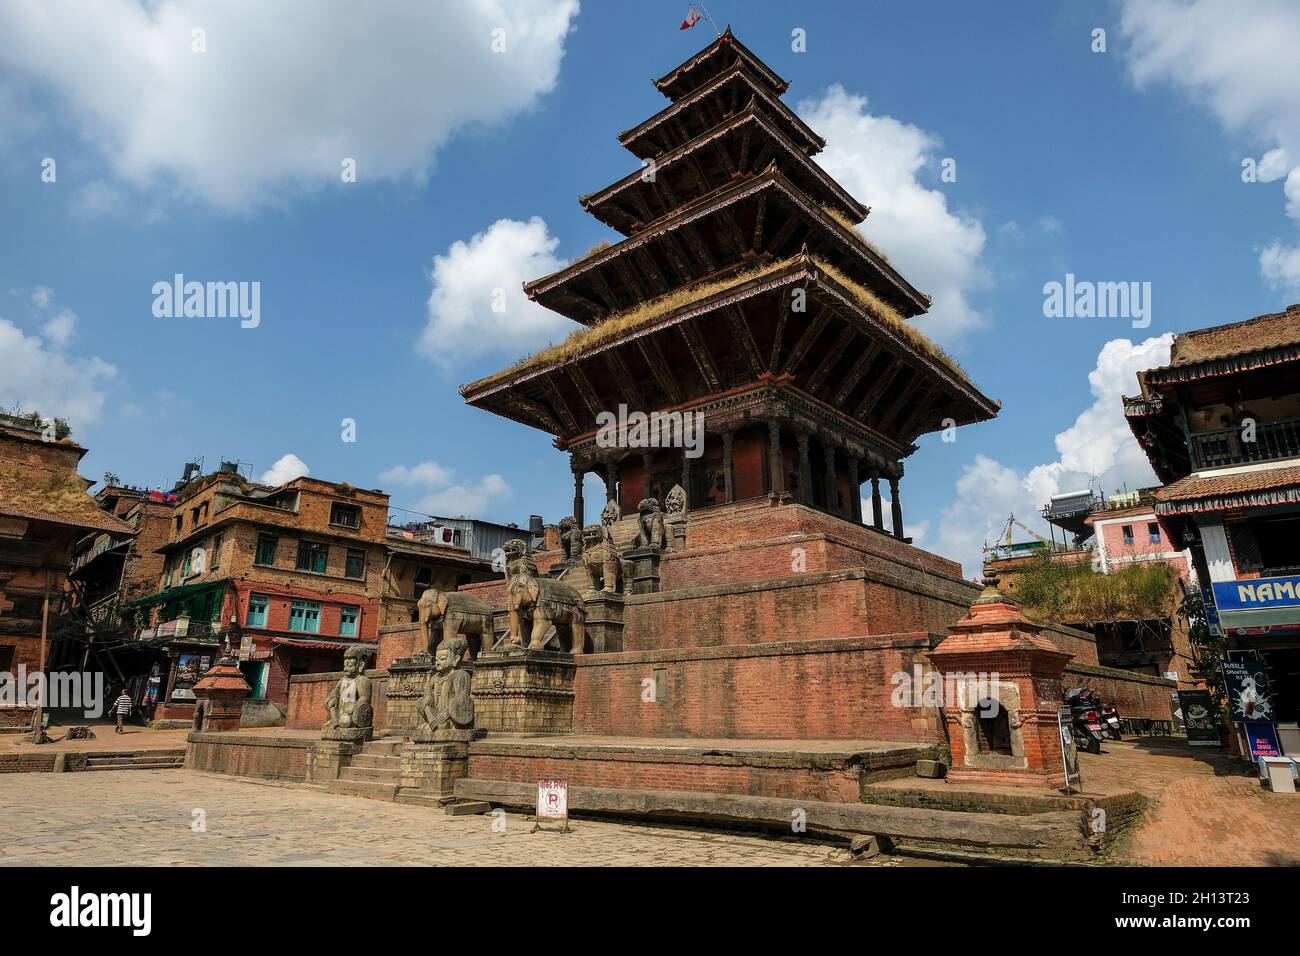 Bhaktapur, Nepal - October 2021: Nyatapola Temple is a Hindu temple built in Pagoda Style in Taumadhi Square in Bhaktapur on October 10, 2021 in Kathm Stock Photo